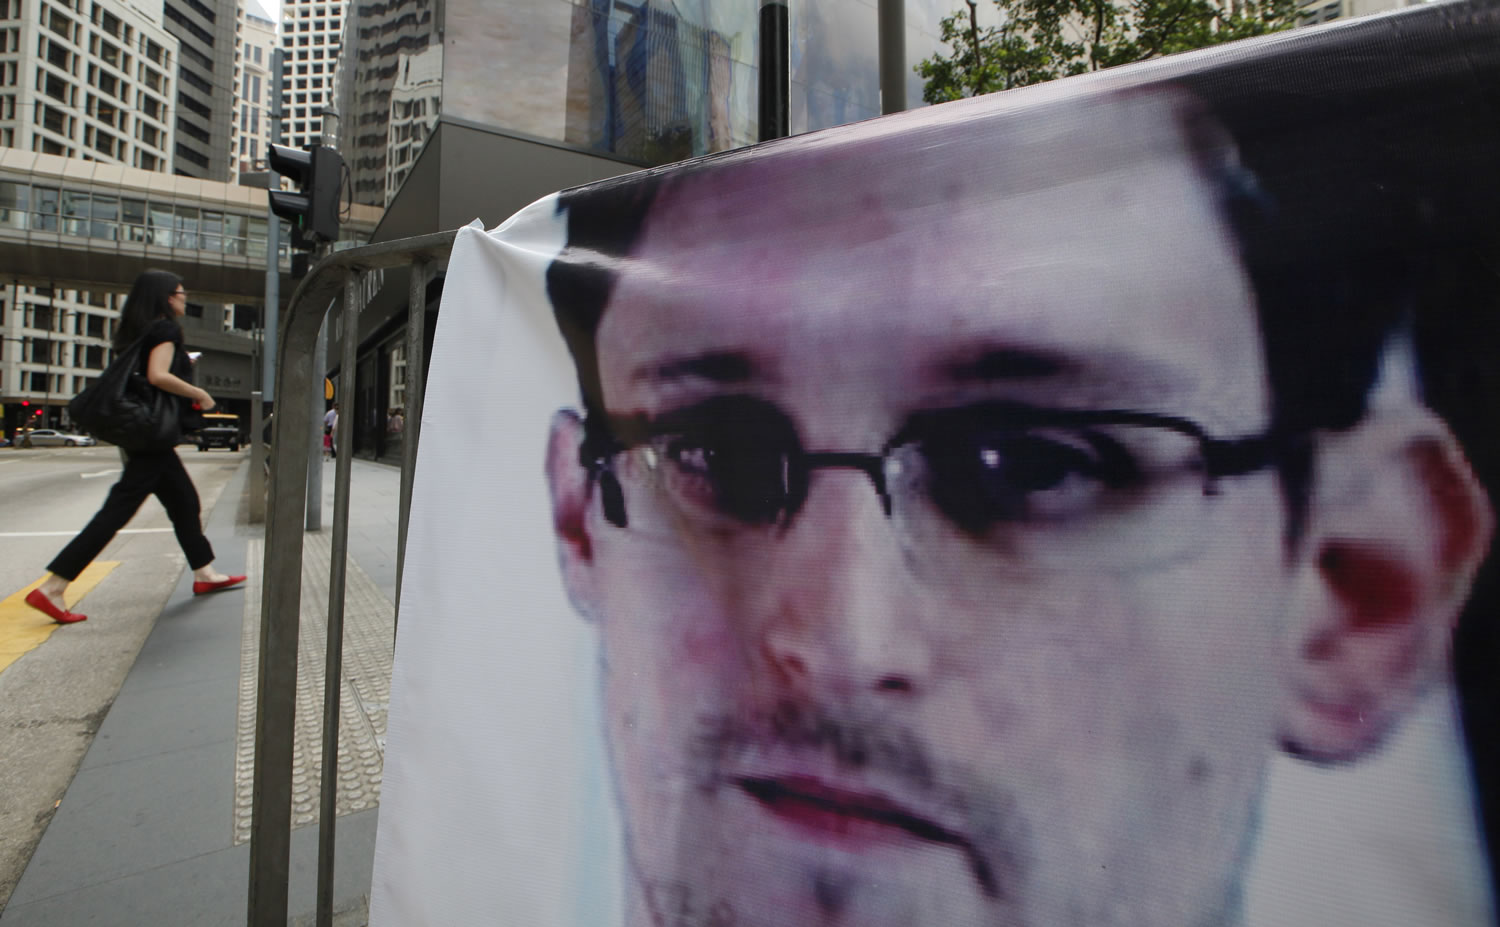 A banner supporting Edward Snowden, a former CIA employee who leaked top-secret documents about sweeping U.S. surveillance programs, is displayed Thursday at Central, Hong Kong's business district.